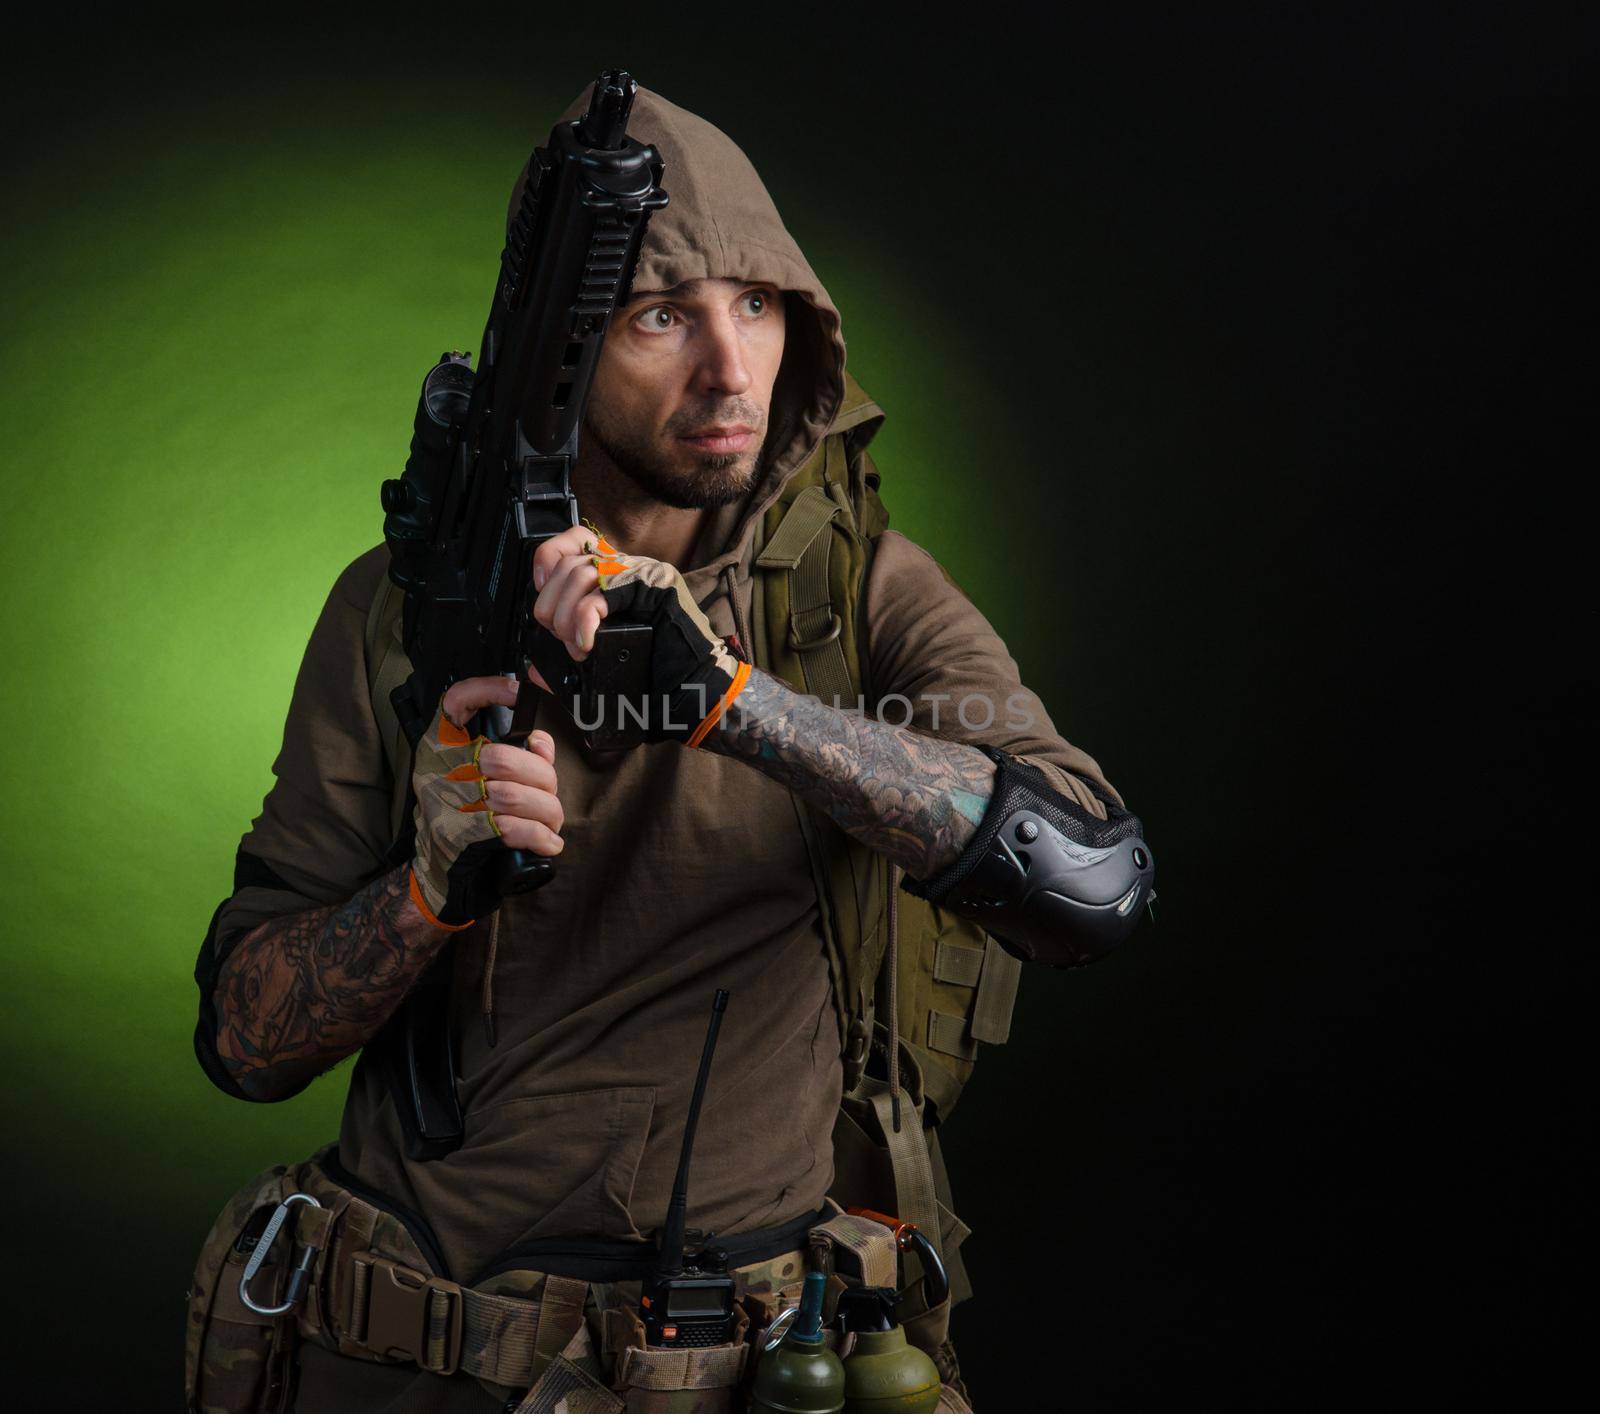 the man Stalker with a gun with an optical sight and a backpack on a dark background with emotions looking, aiming, watching, sneaking